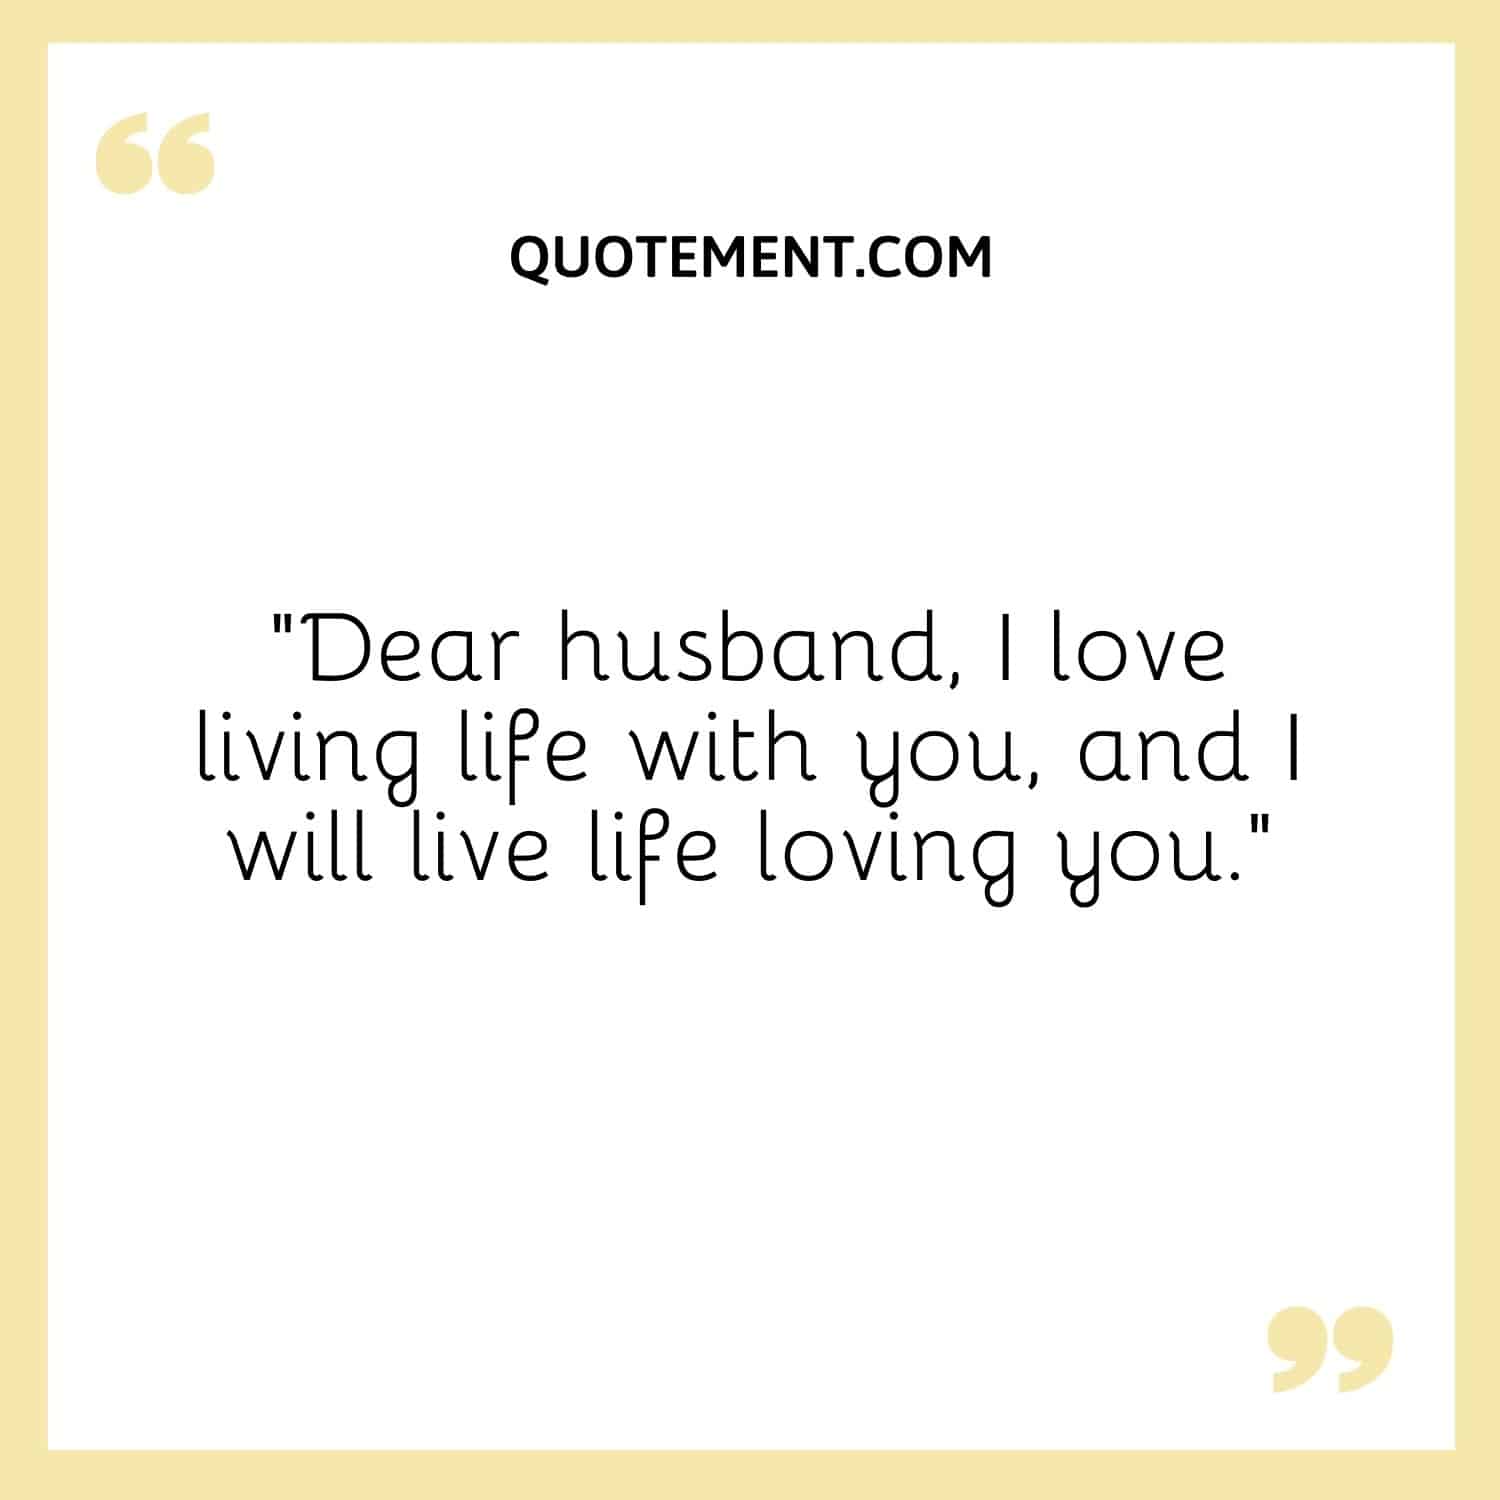 “Dear husband, I love living life with you, and I will live life loving you.”